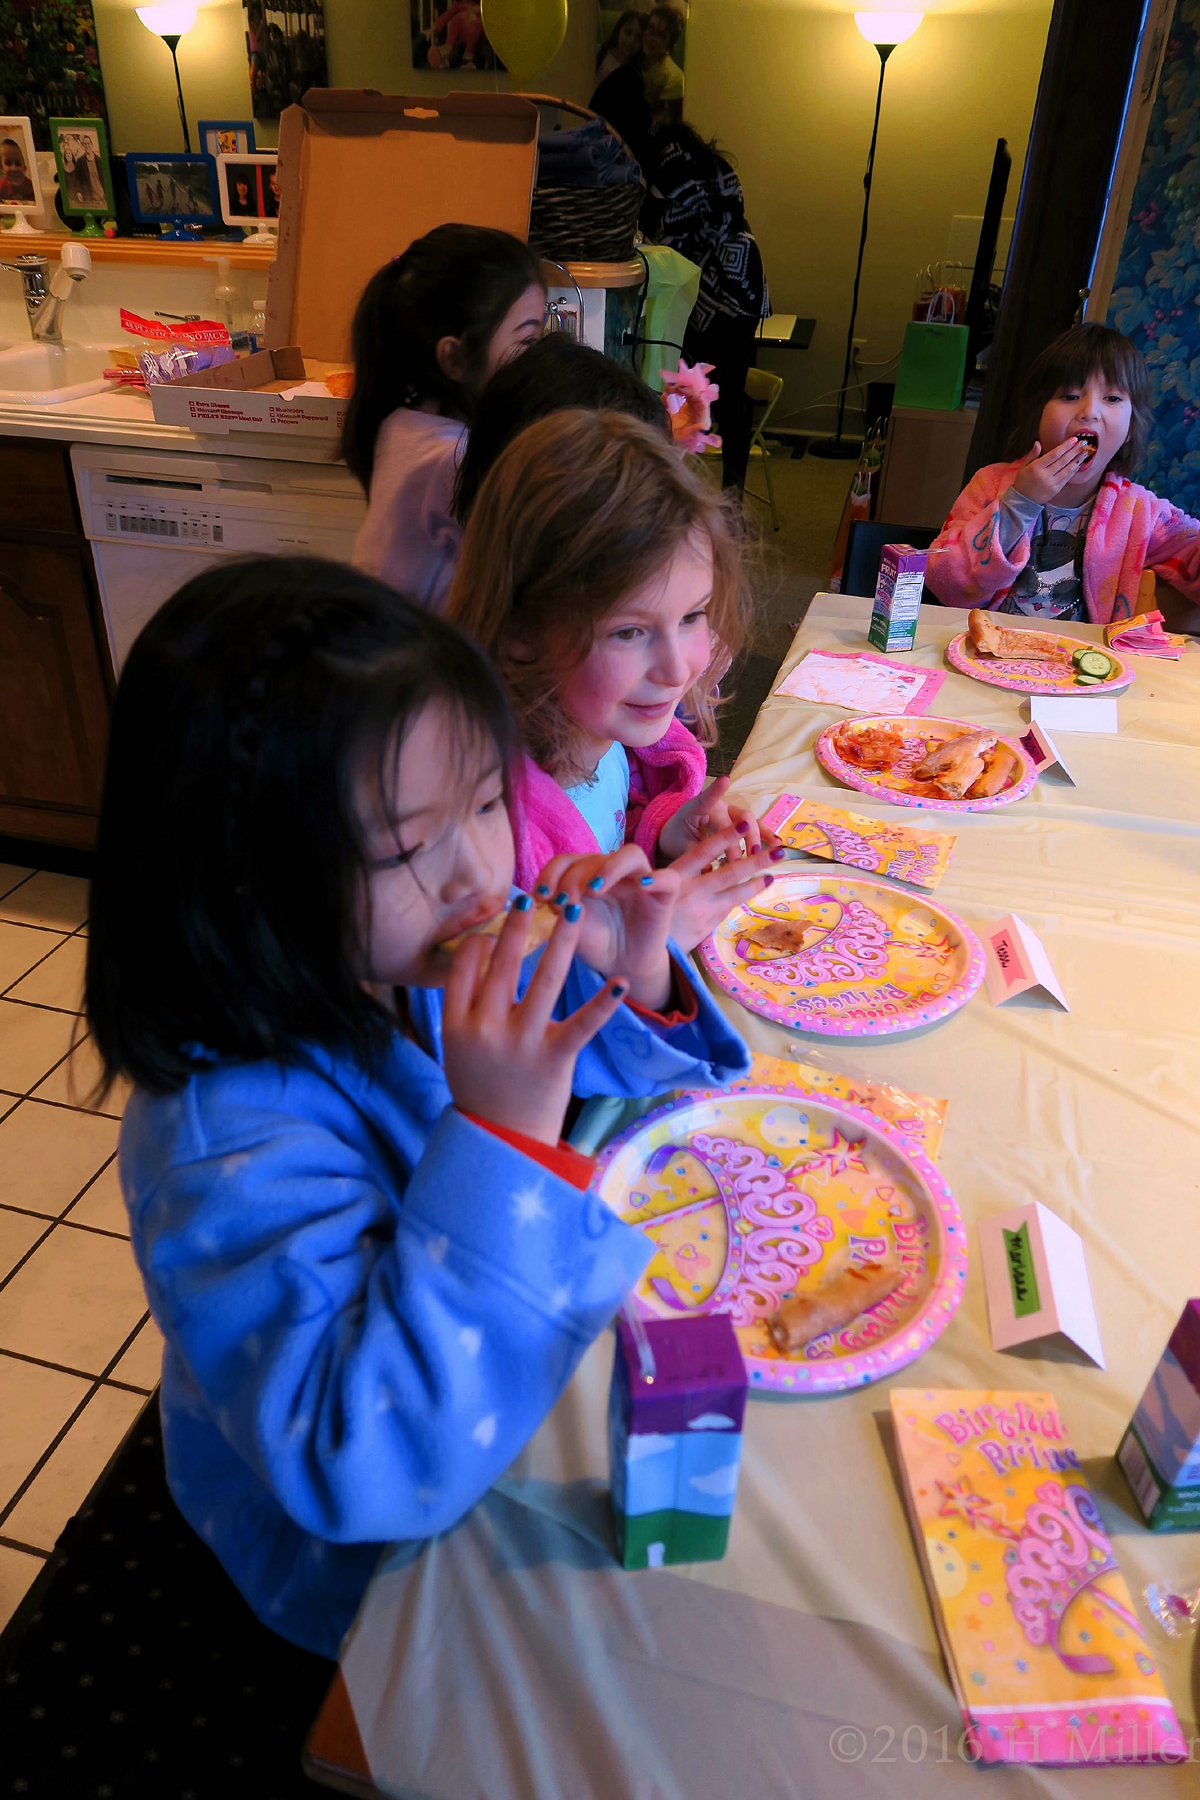 Yummy Pizza Dinner At The Kids Spa Birthday Party!